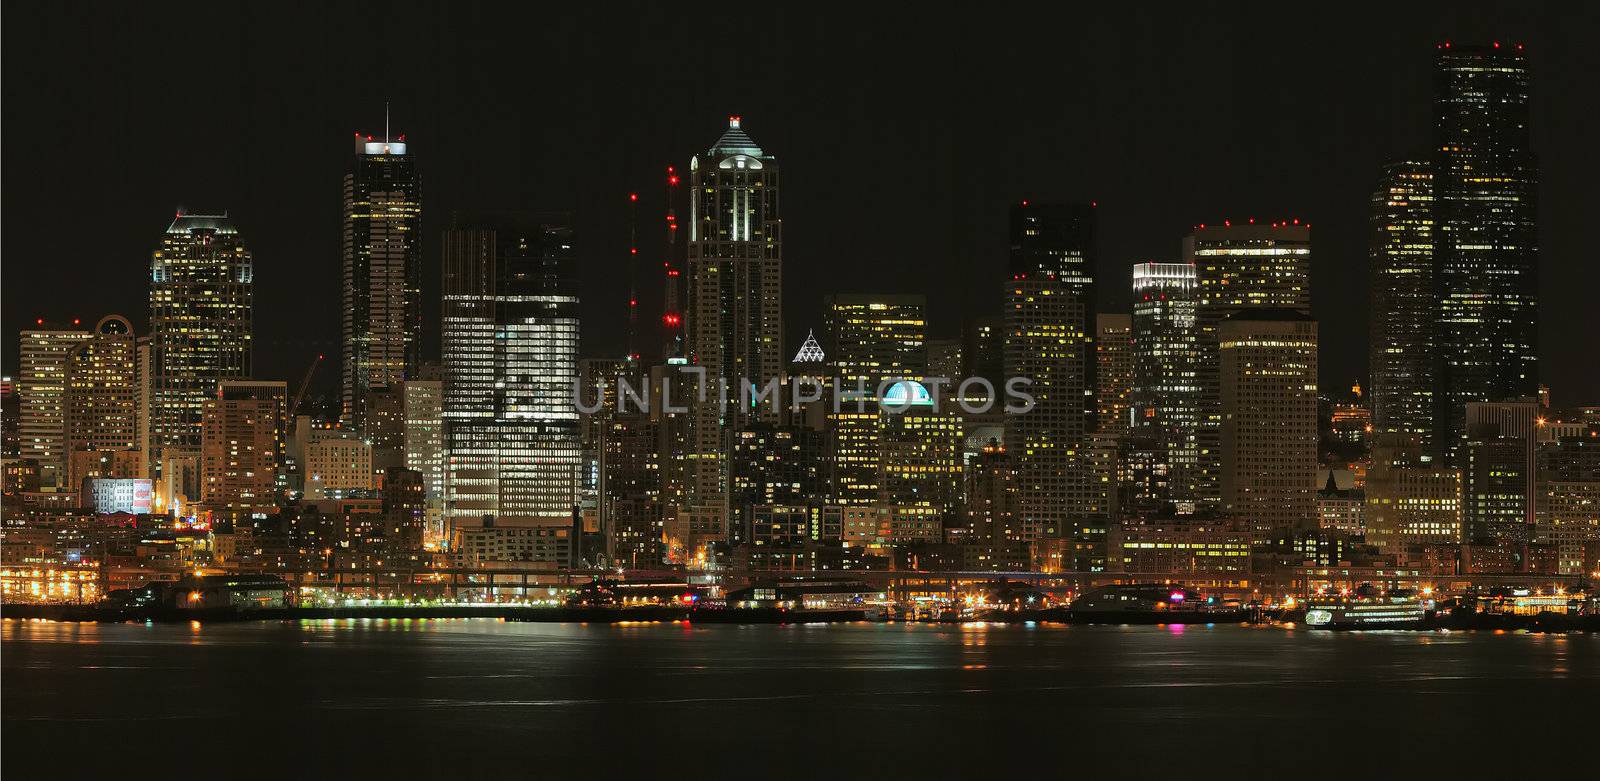 Seattle at Night by LoonChild